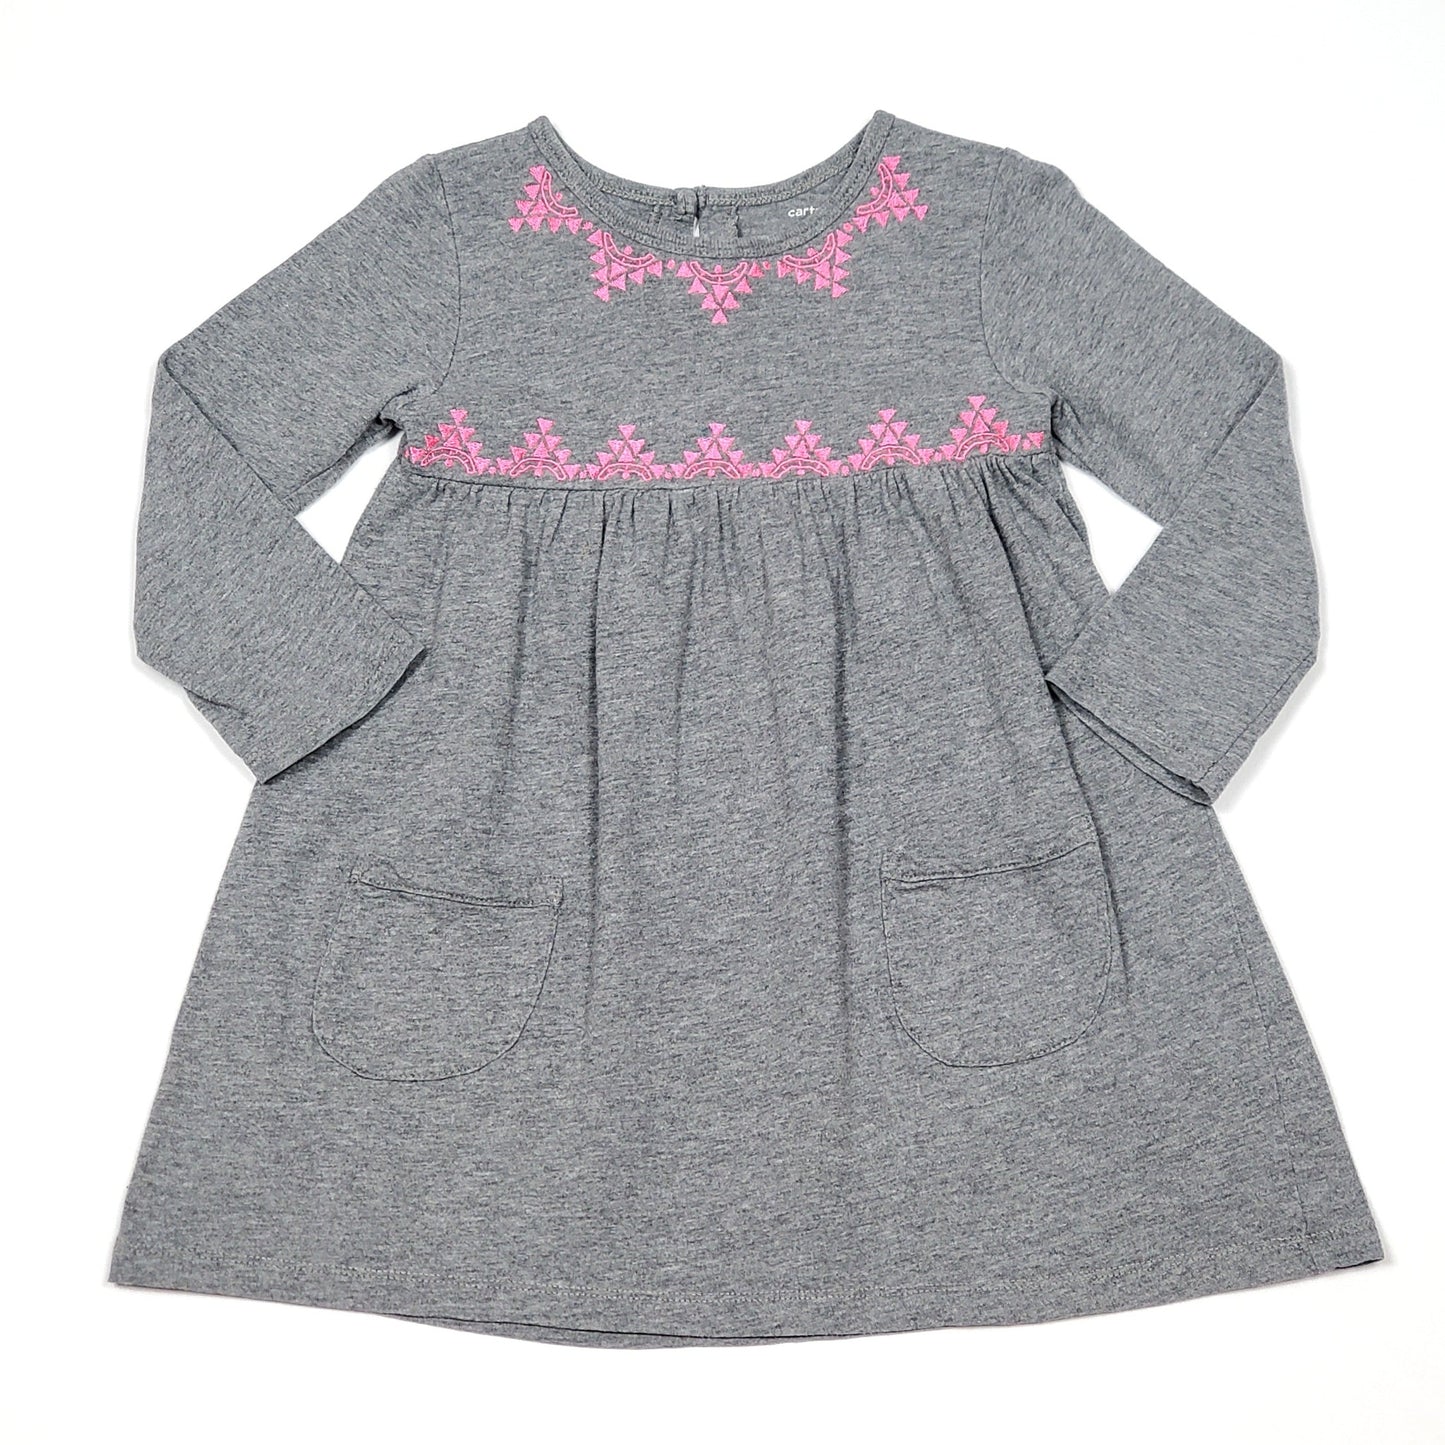 Carters Grey Pink Embroidered Girls Dress 3T Used View 1